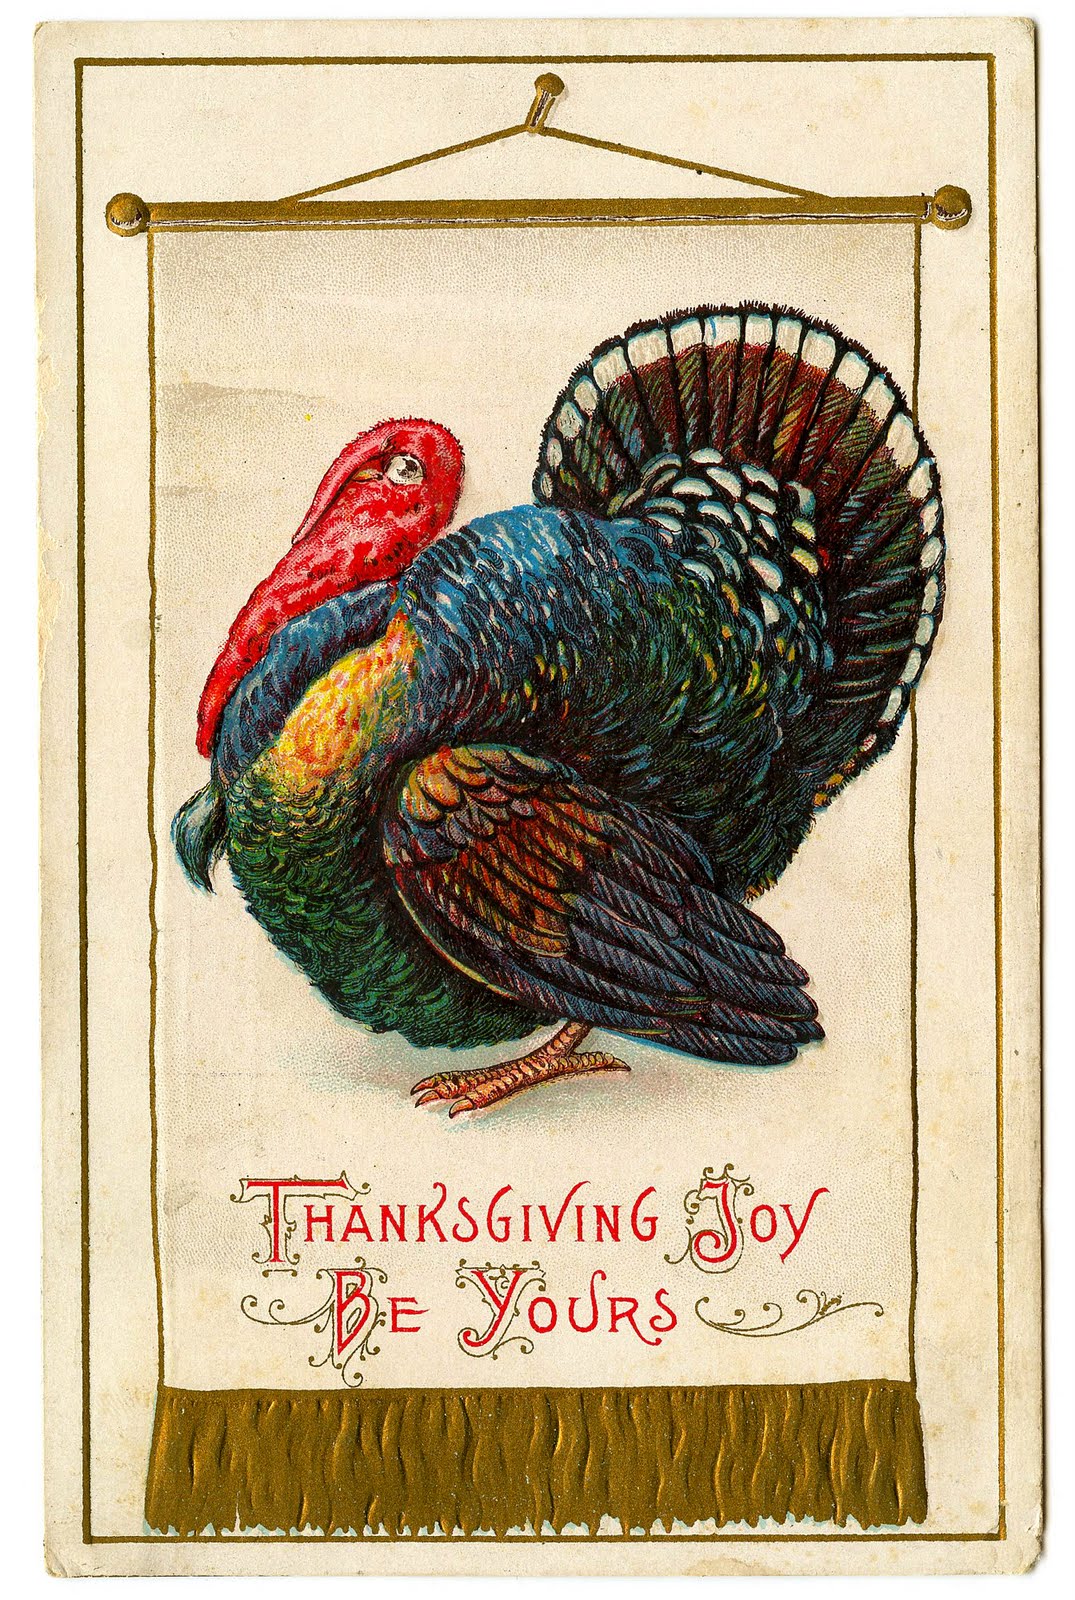 Vintage Thanksgiving Clip Art   Colorful Turkey   The Graphics Fairy